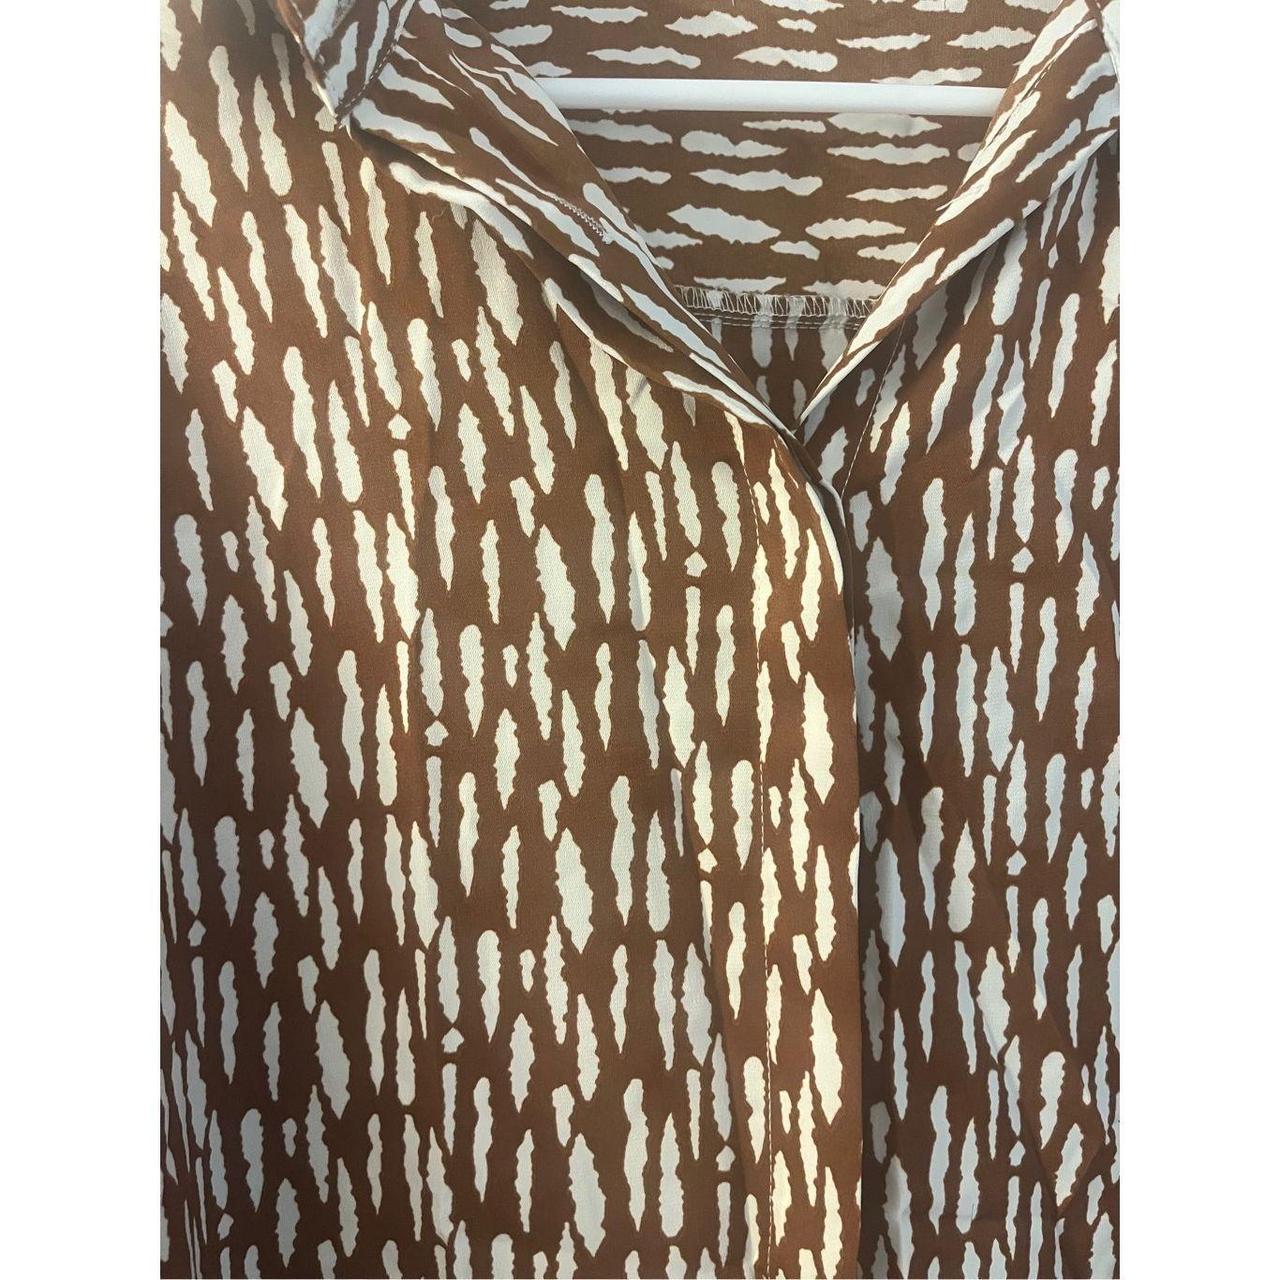 Country Road Men's Brown and White Shirt (4)